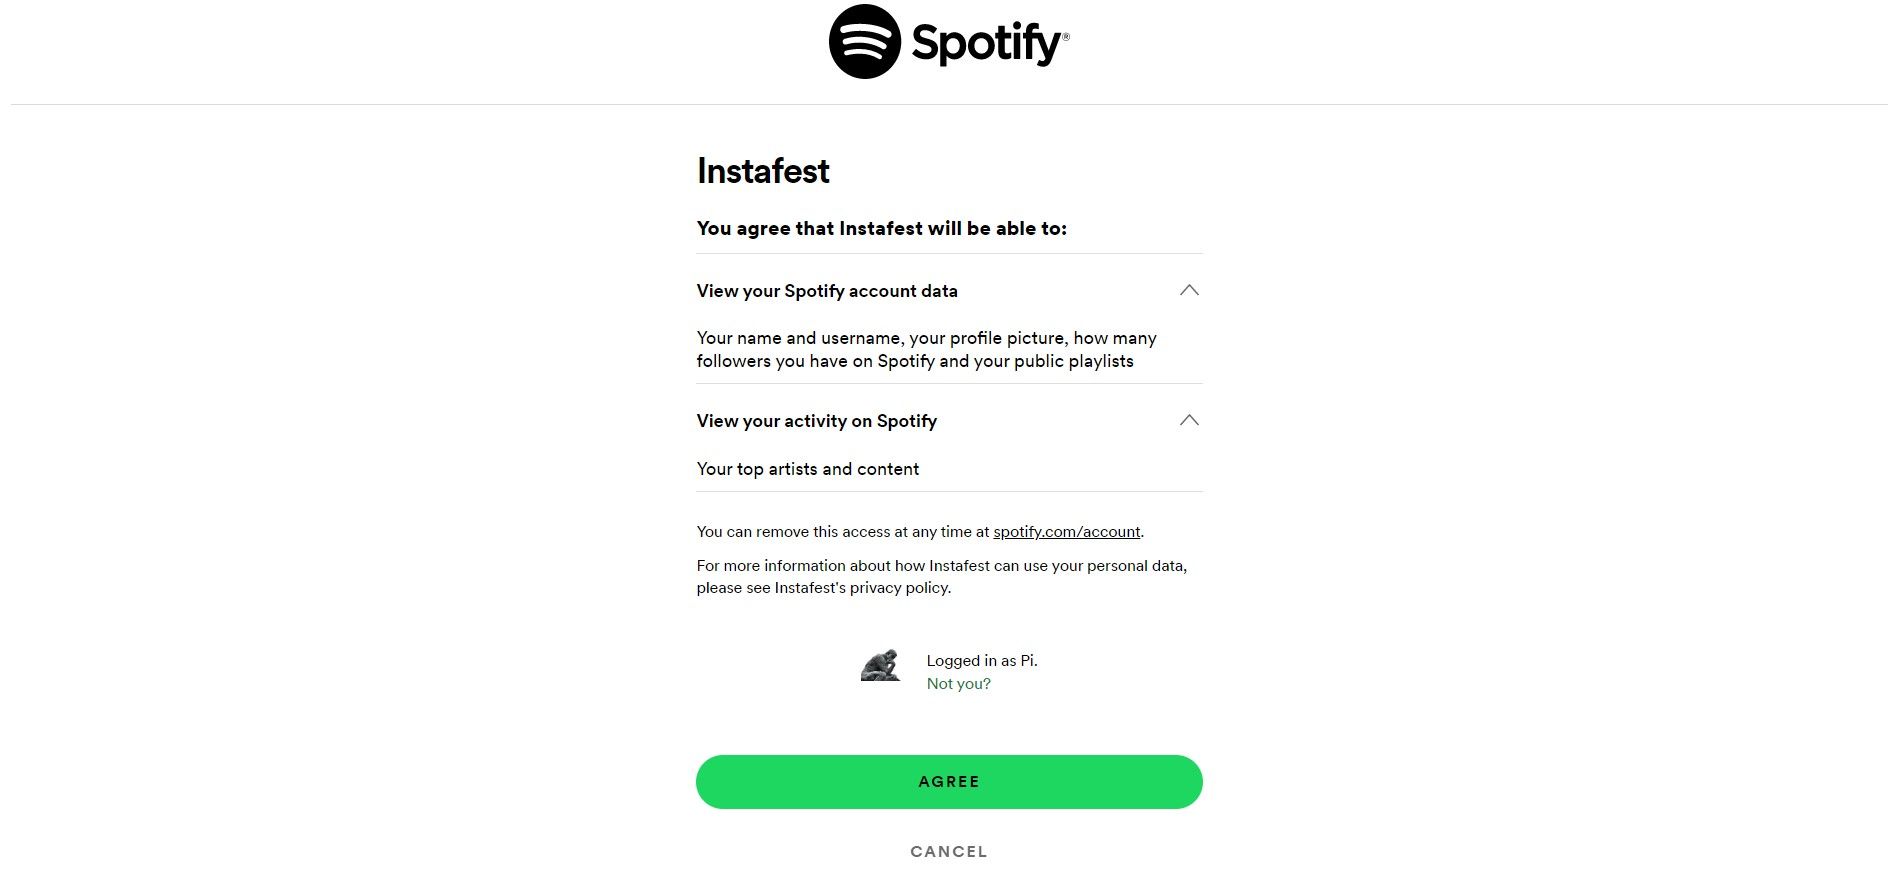 Spotify permissions required for Instafest